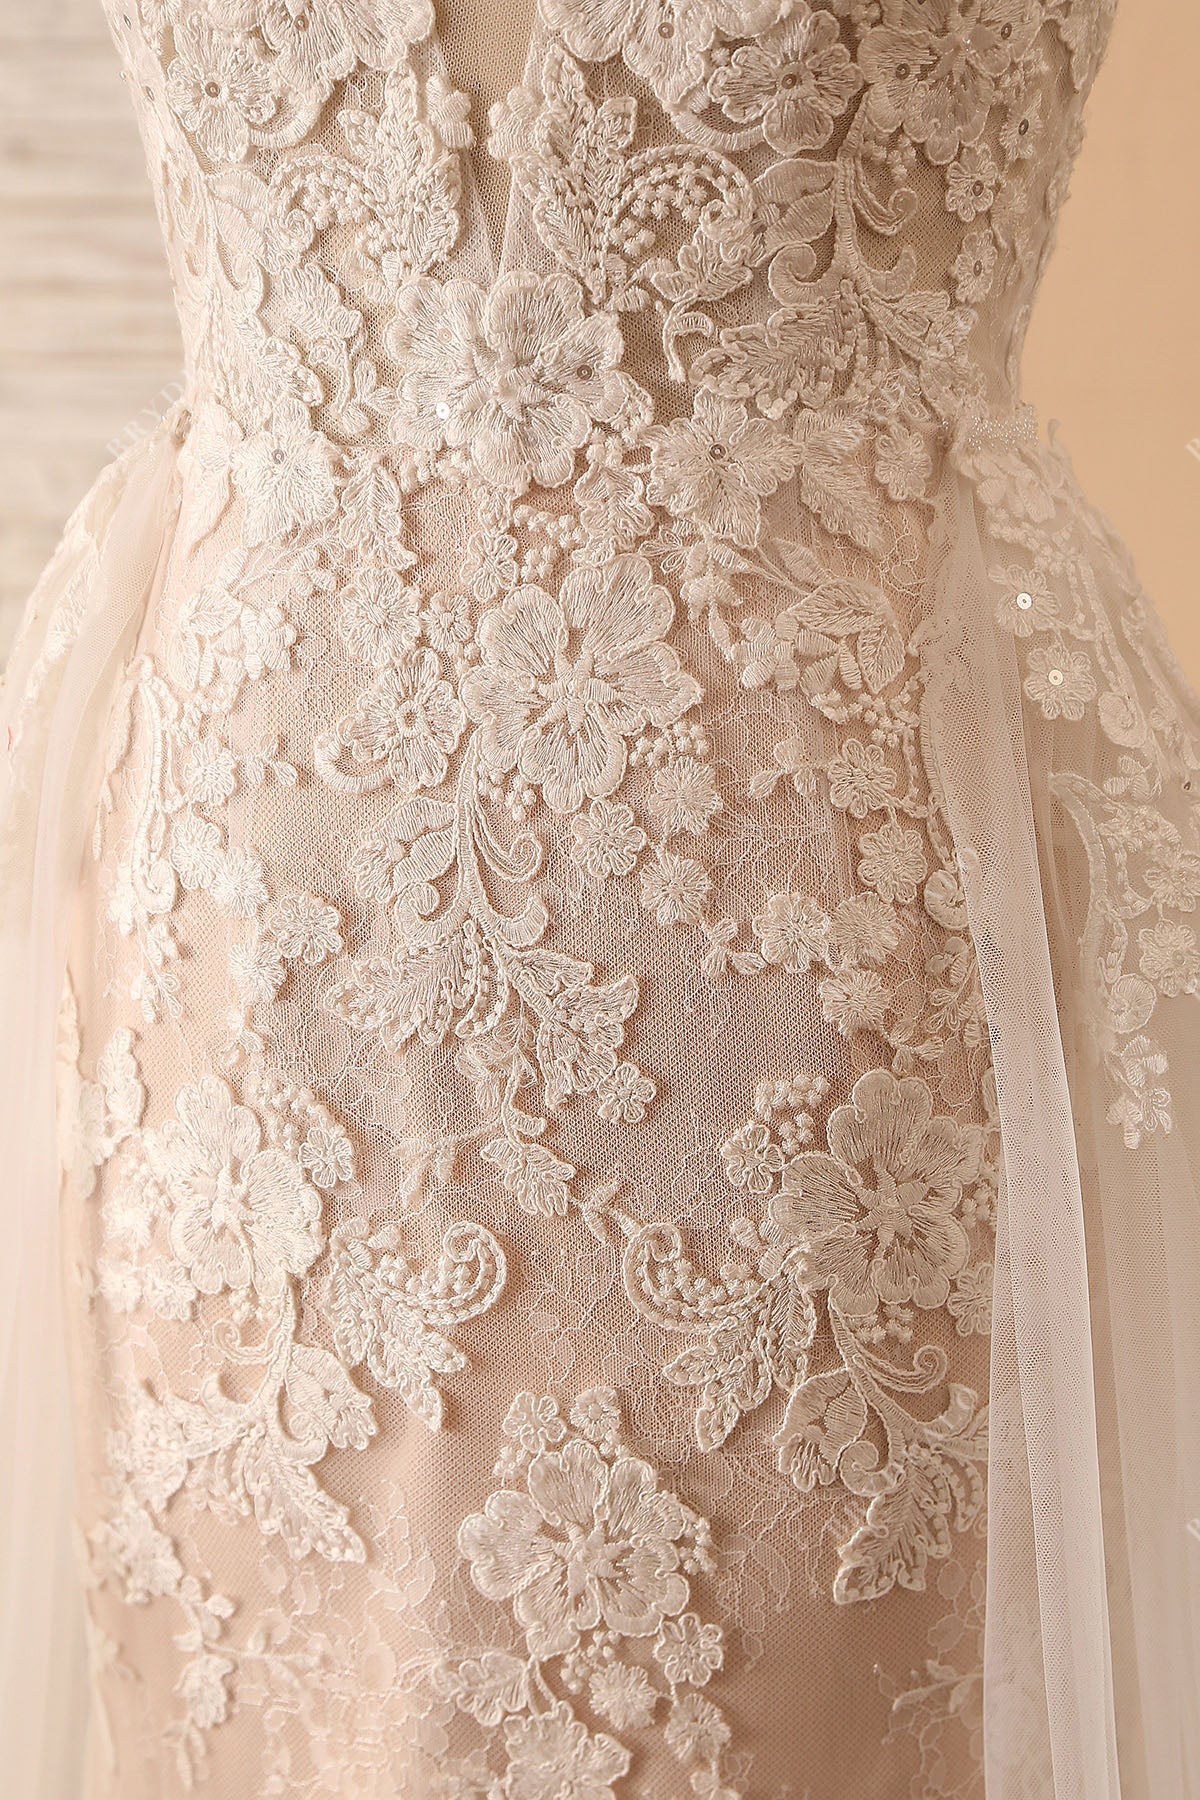 designer floral lace overlaid pearl pink colored wedding gown